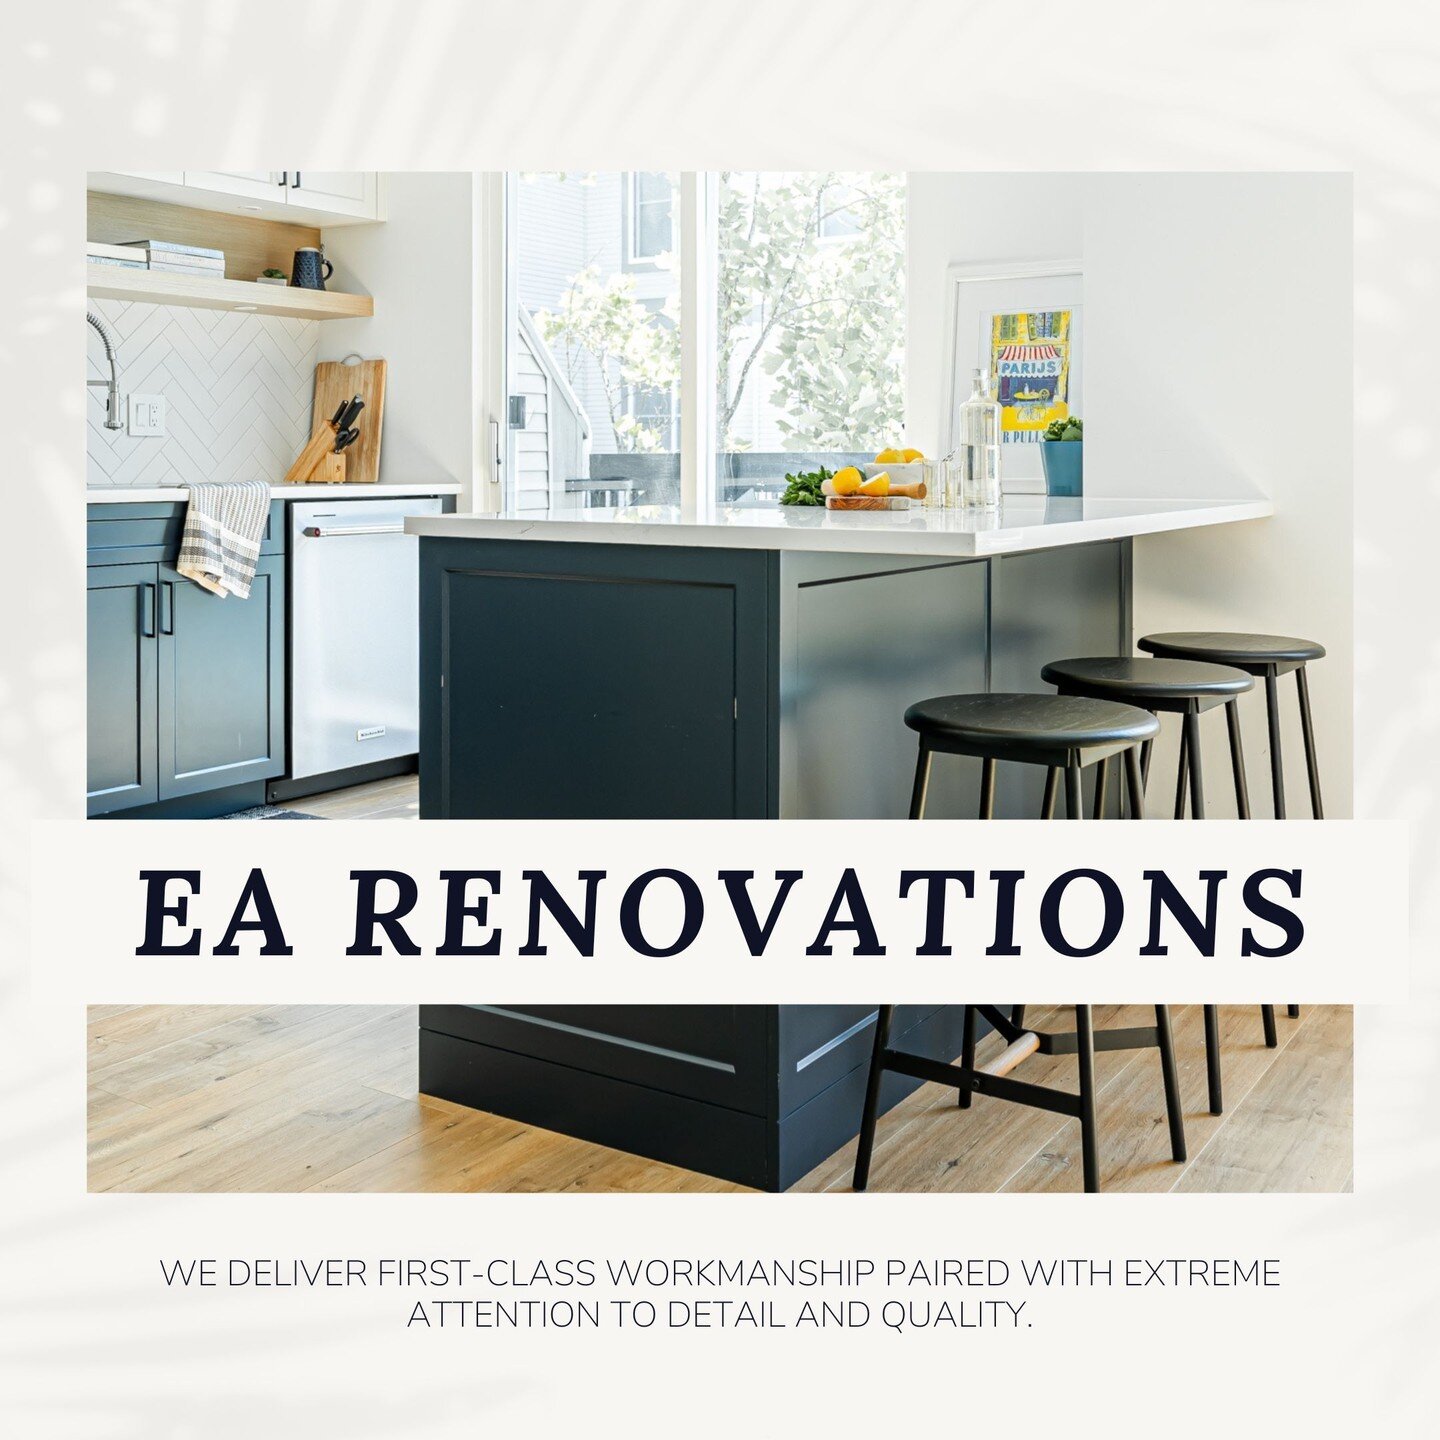 EA Renovations delivers first-class workmanship paired with extreme attention to detail and quality.⁠
⁠
Your home is your sanctuary - let EA Renovations help you make it truly special!  Contact us today to schedule a consultation!⁠
⁠
We would love to